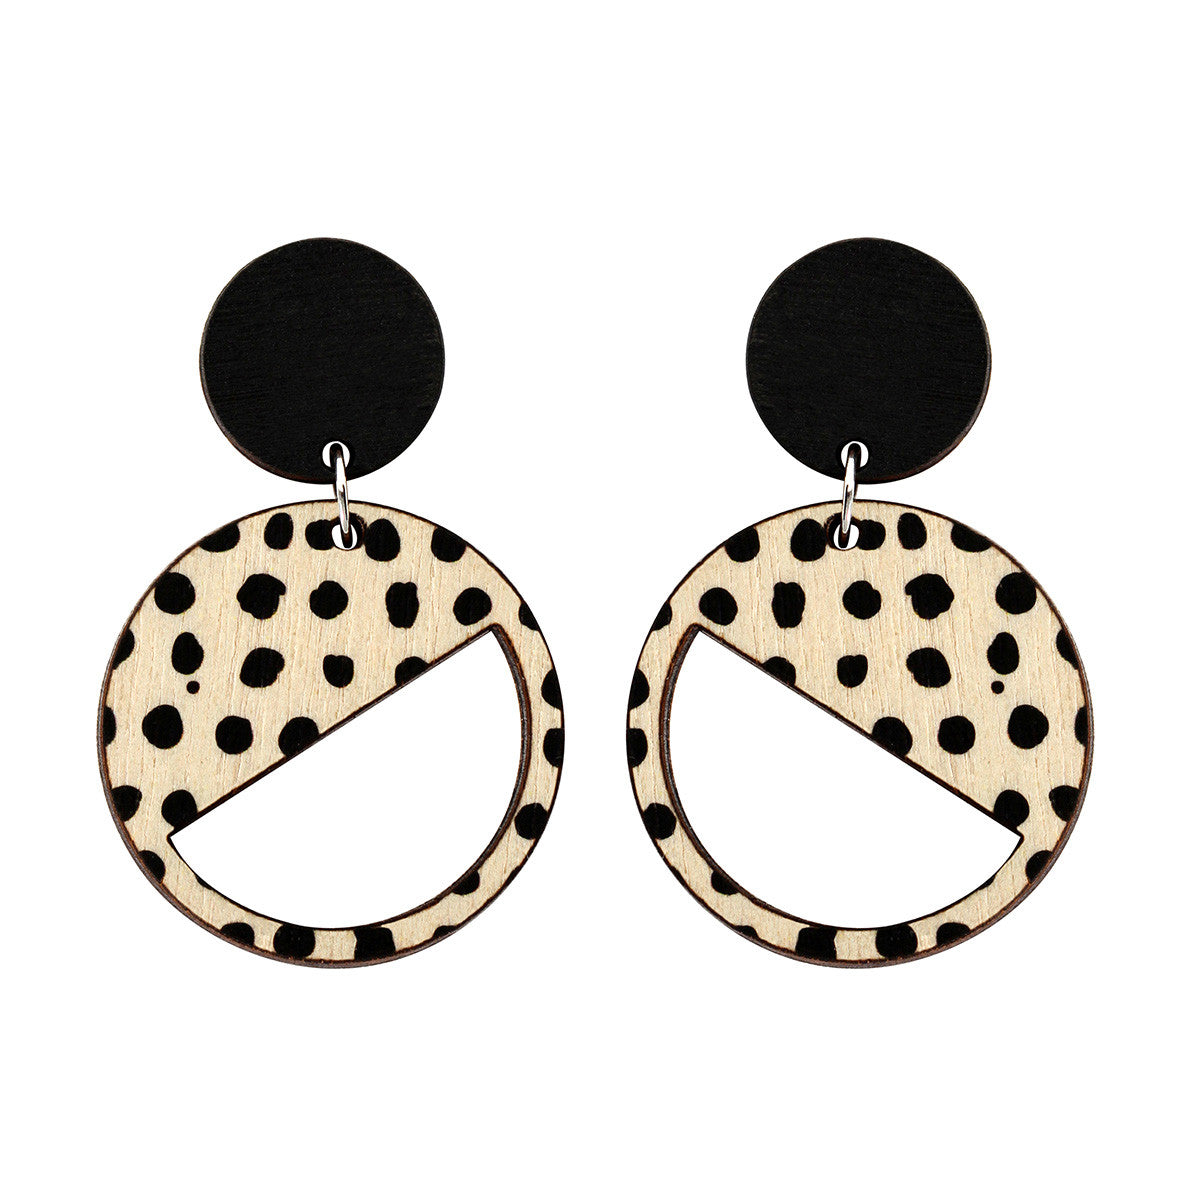 2 tiered earrings with black and black spots